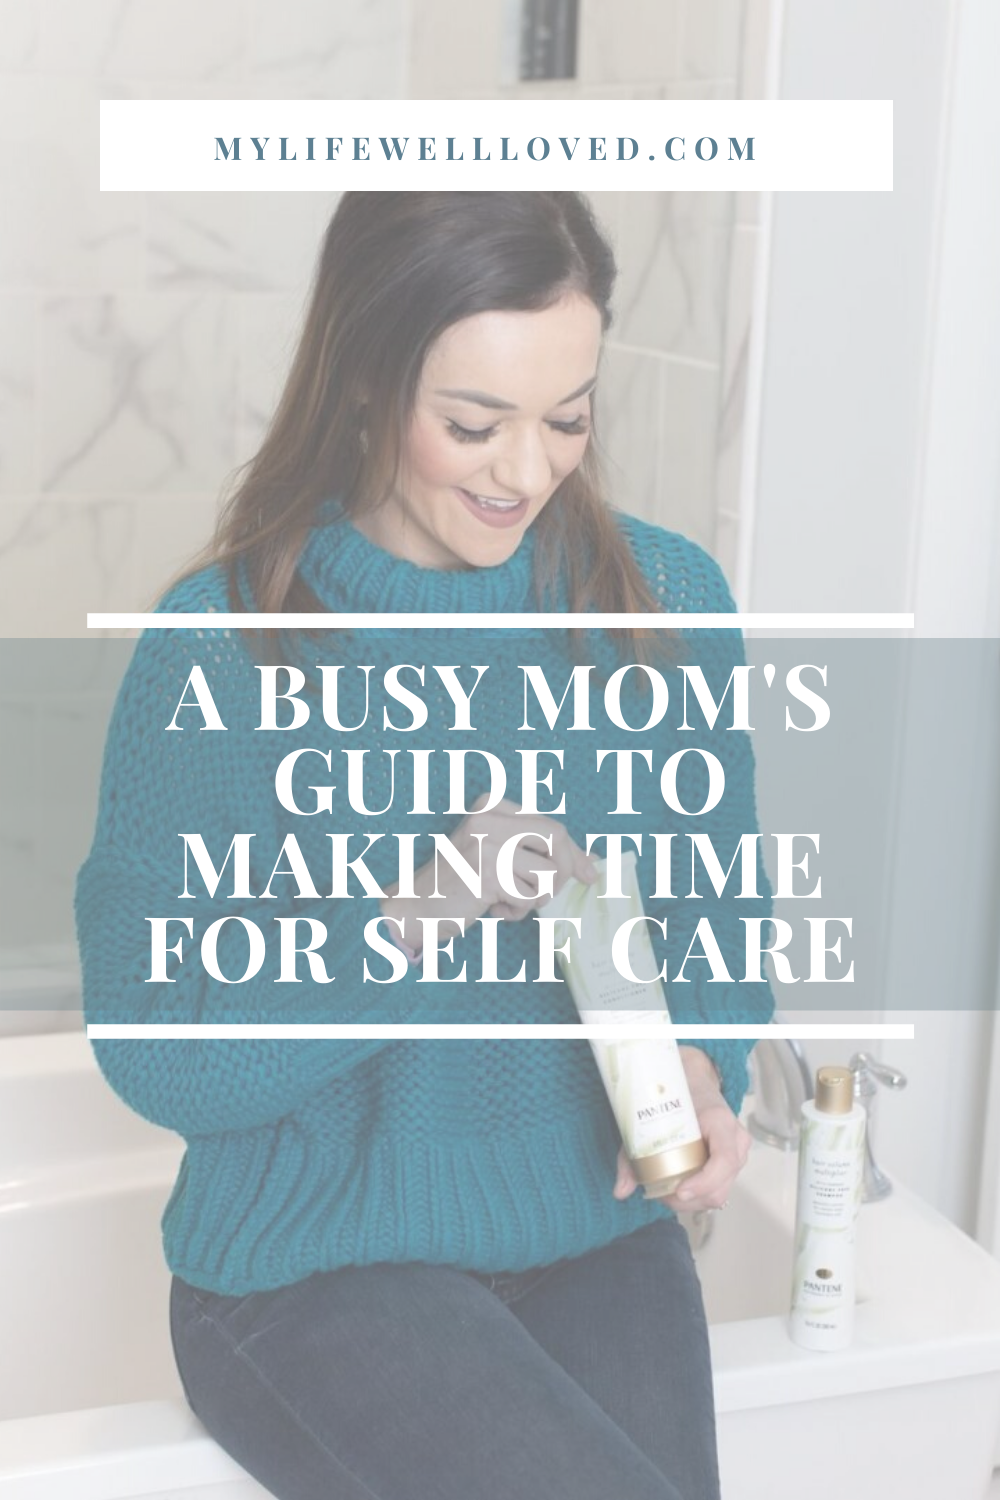 https://www.mylifewellloved.com/wp-content/uploads/A-Busy-Moms-Guide-To-Making-Time-For-Self-Care.png